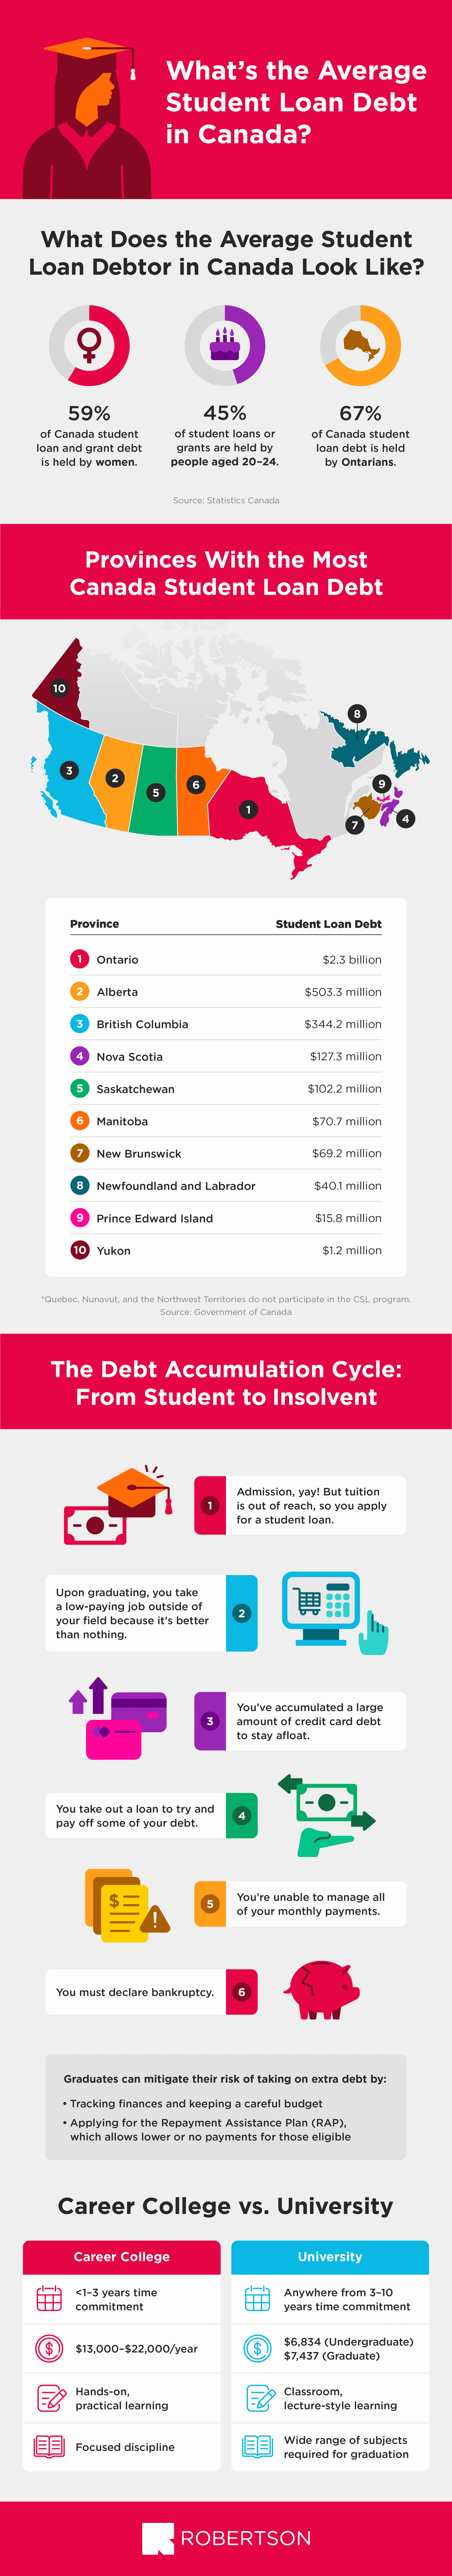 Average student loan debt in Canada infographic